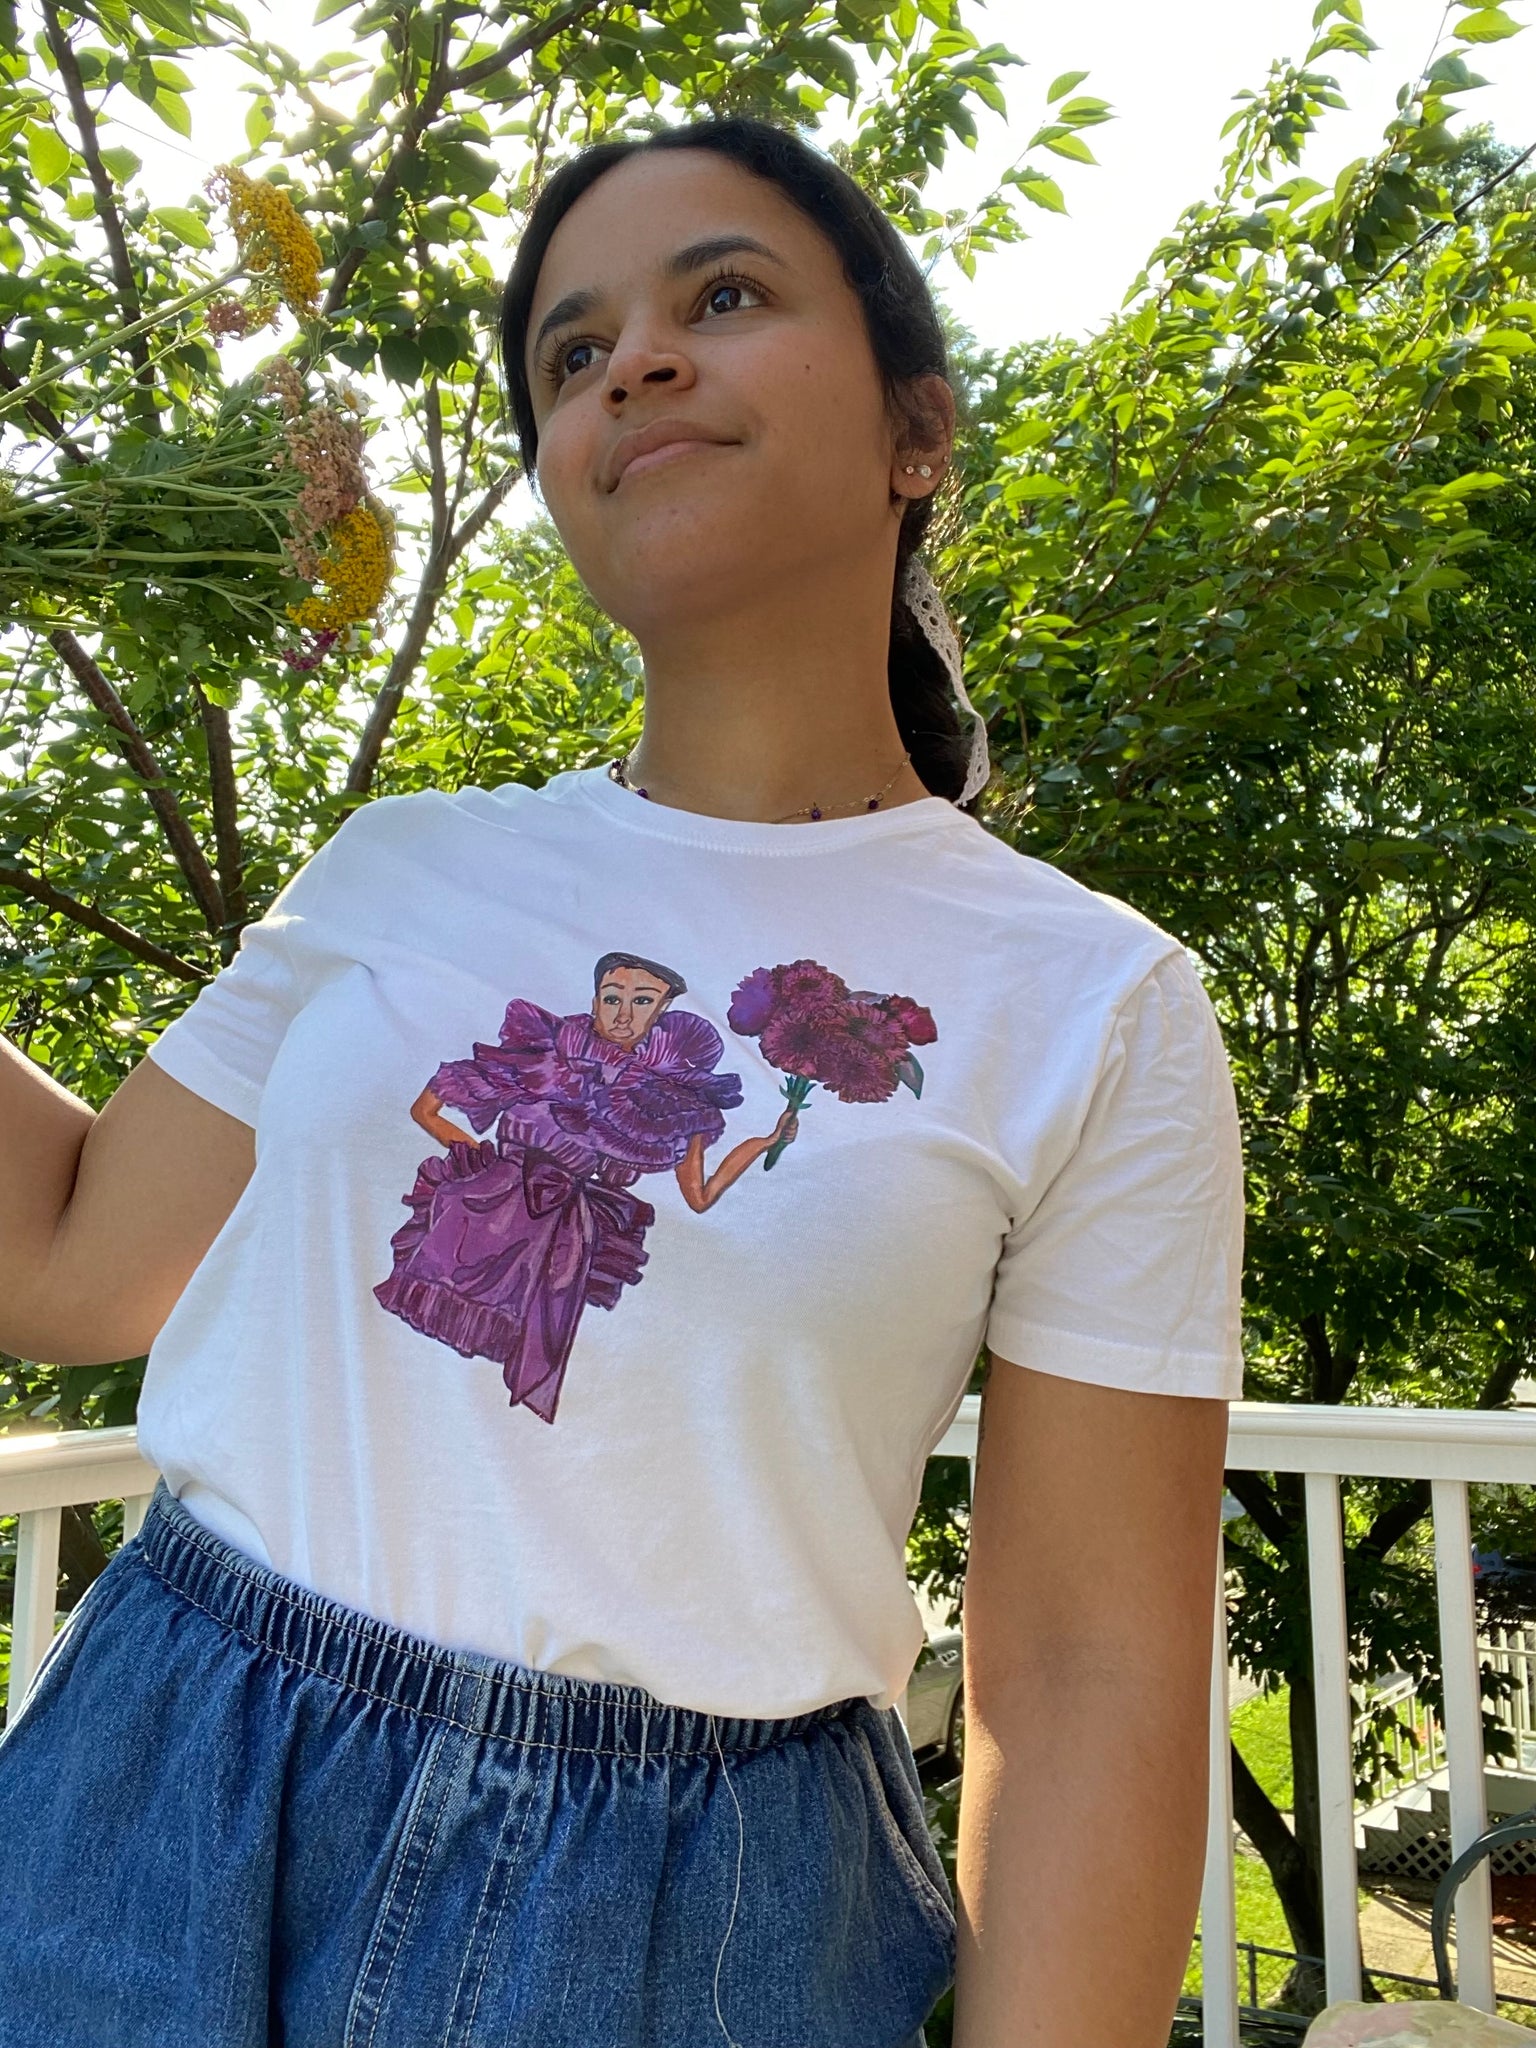 A girl holding flowers and modeling an upcycled white t-shirt with an image on it of model Janaye Furman wearing a purple ruffled gown